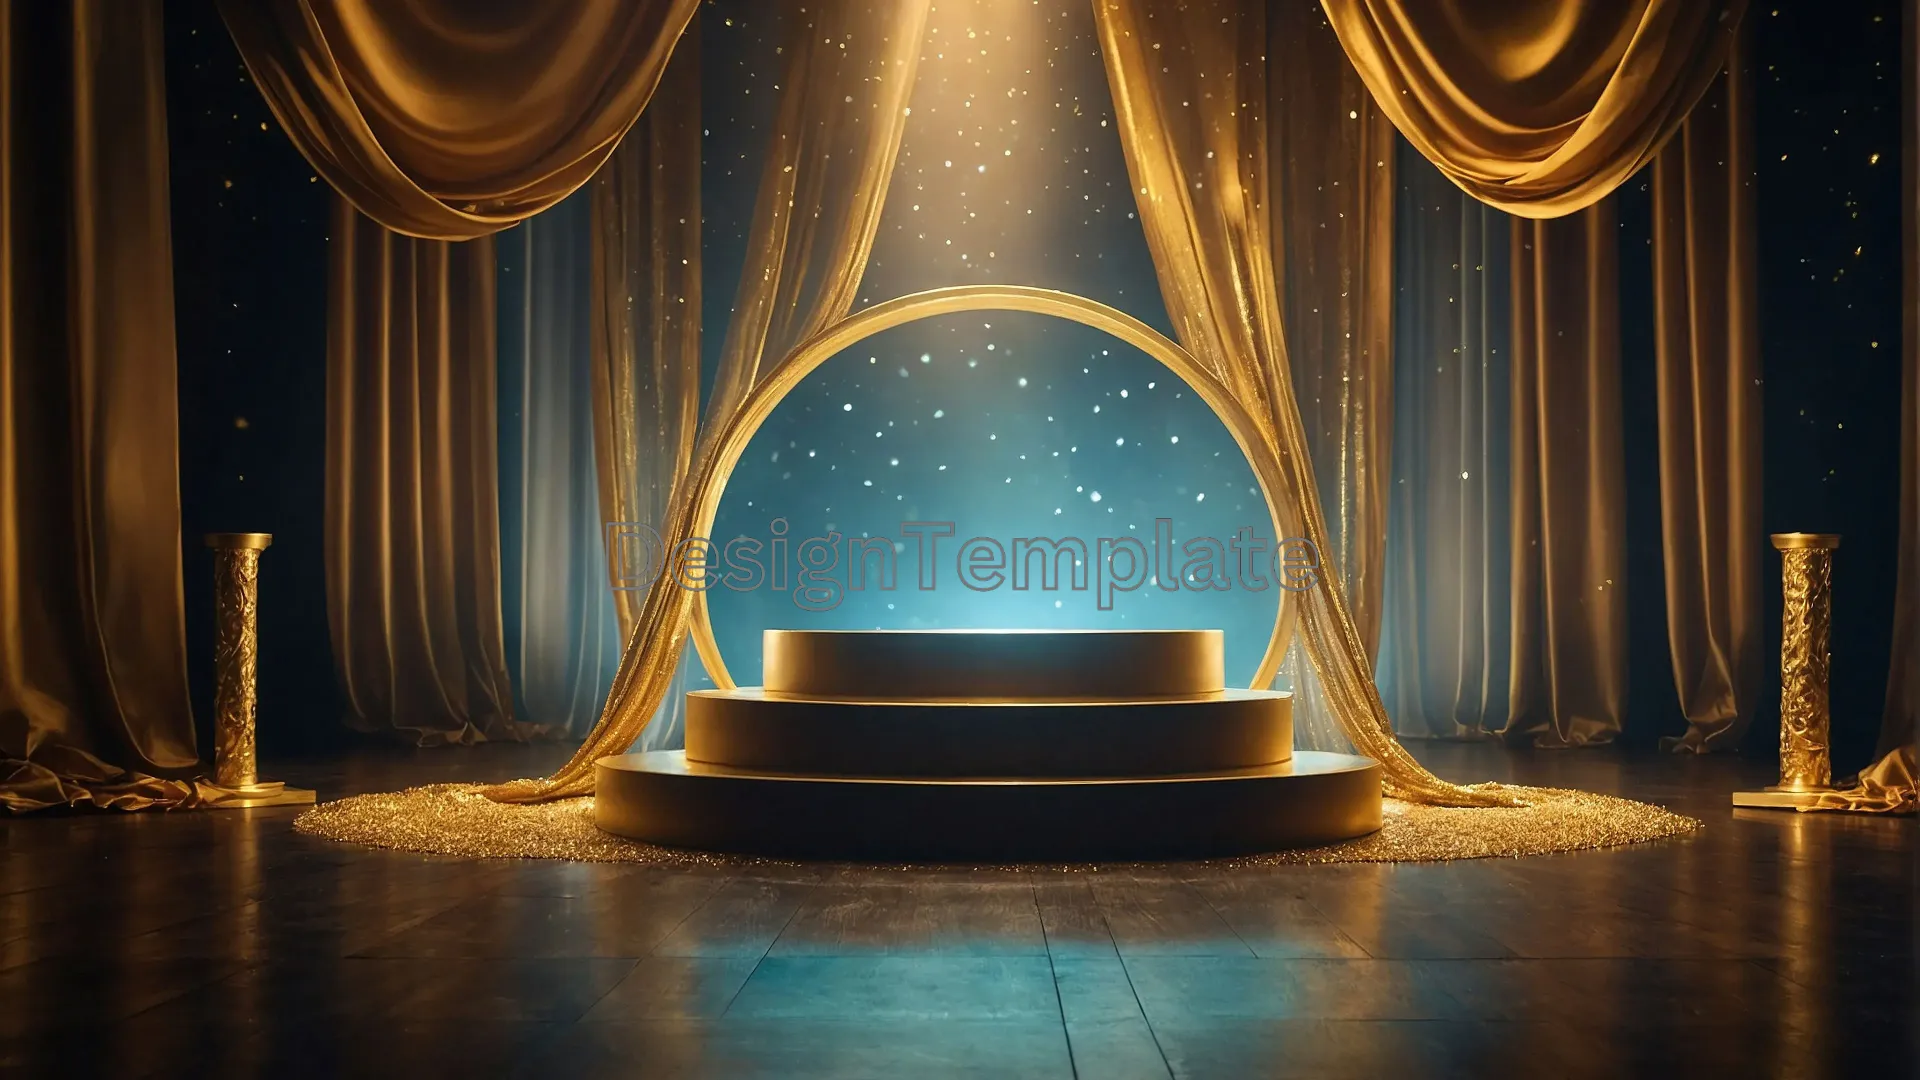 Radiant Background Golden Fabric Sets the Scene for Award Show image